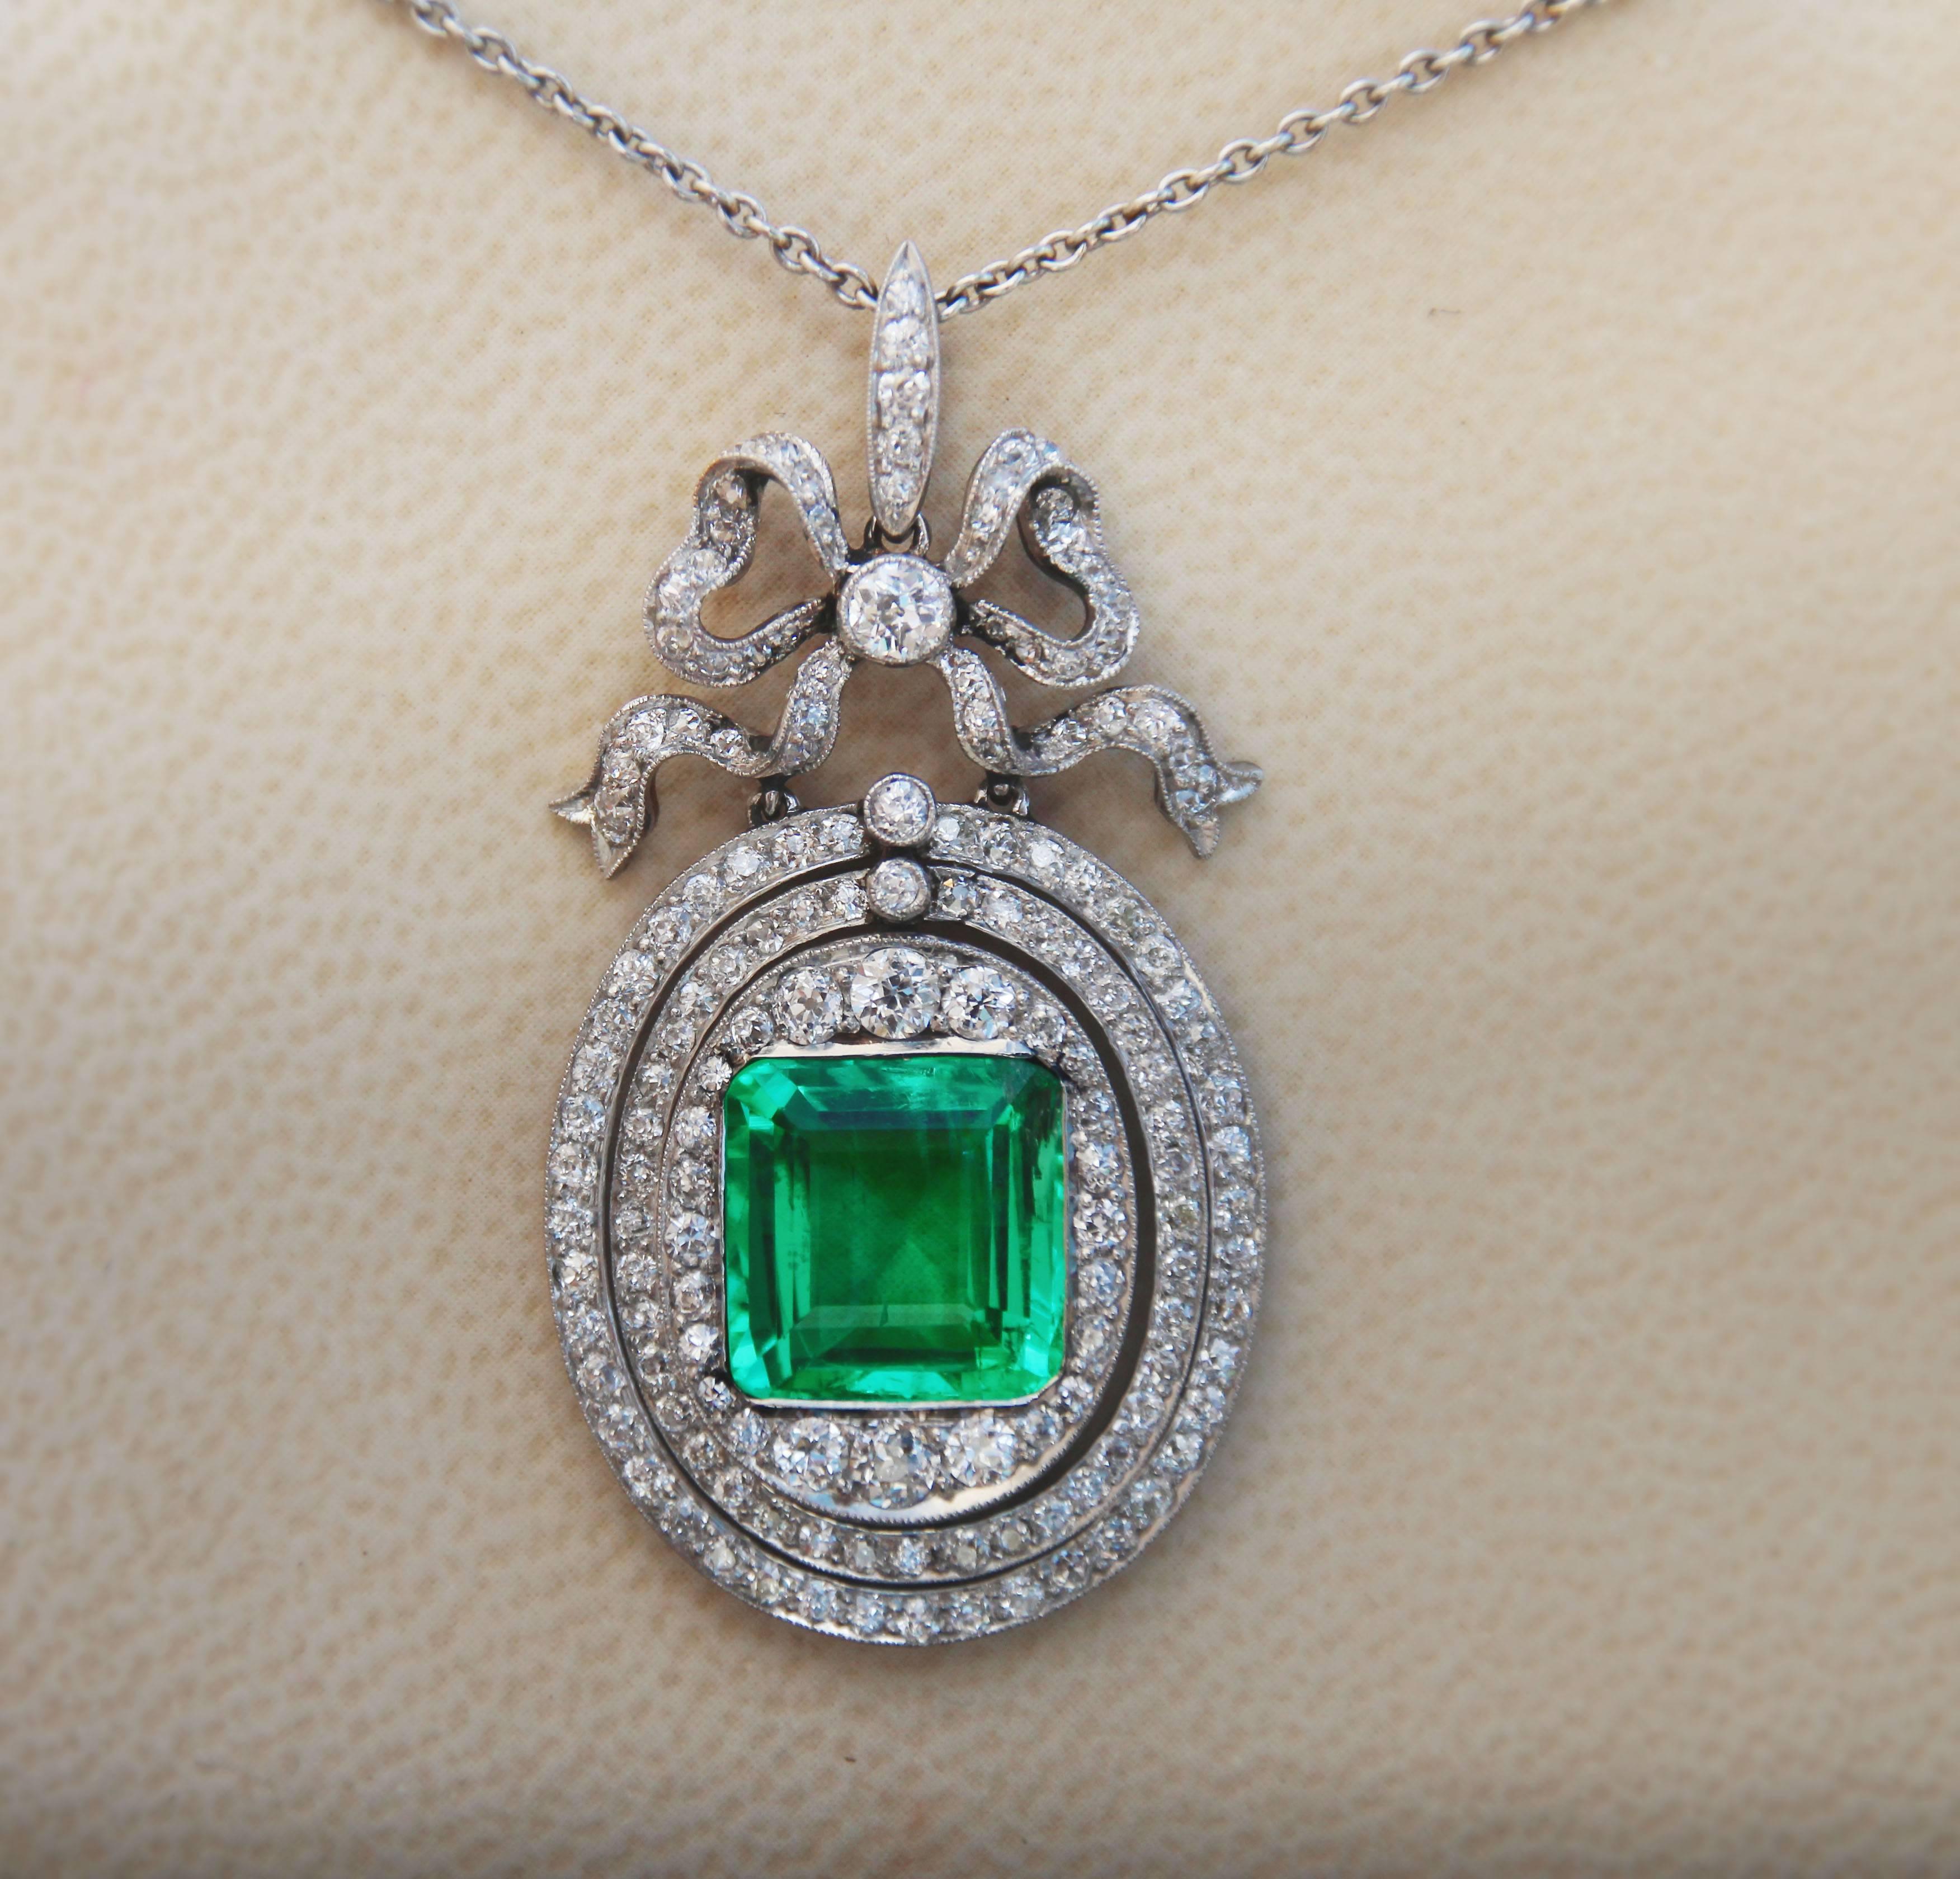 4 Carat Colombian Emerald Diamond Platinum-Topped Gold Pendant, circa 1910 In Excellent Condition For Sale In Bay Harbor Islands, FL